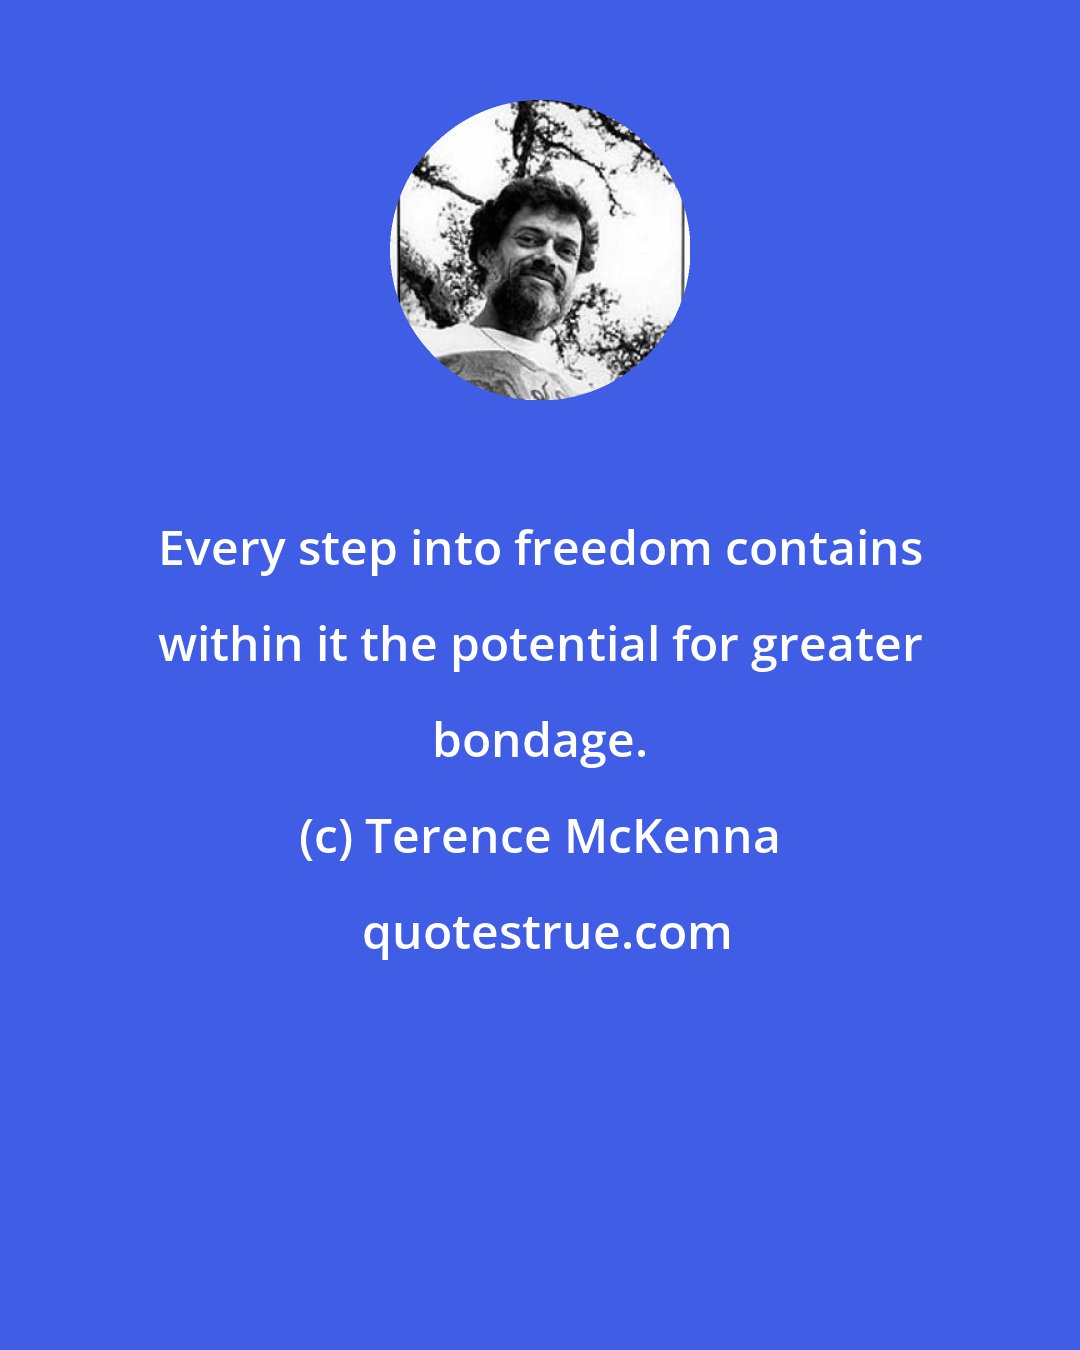 Terence McKenna: Every step into freedom contains within it the potential for greater bondage.